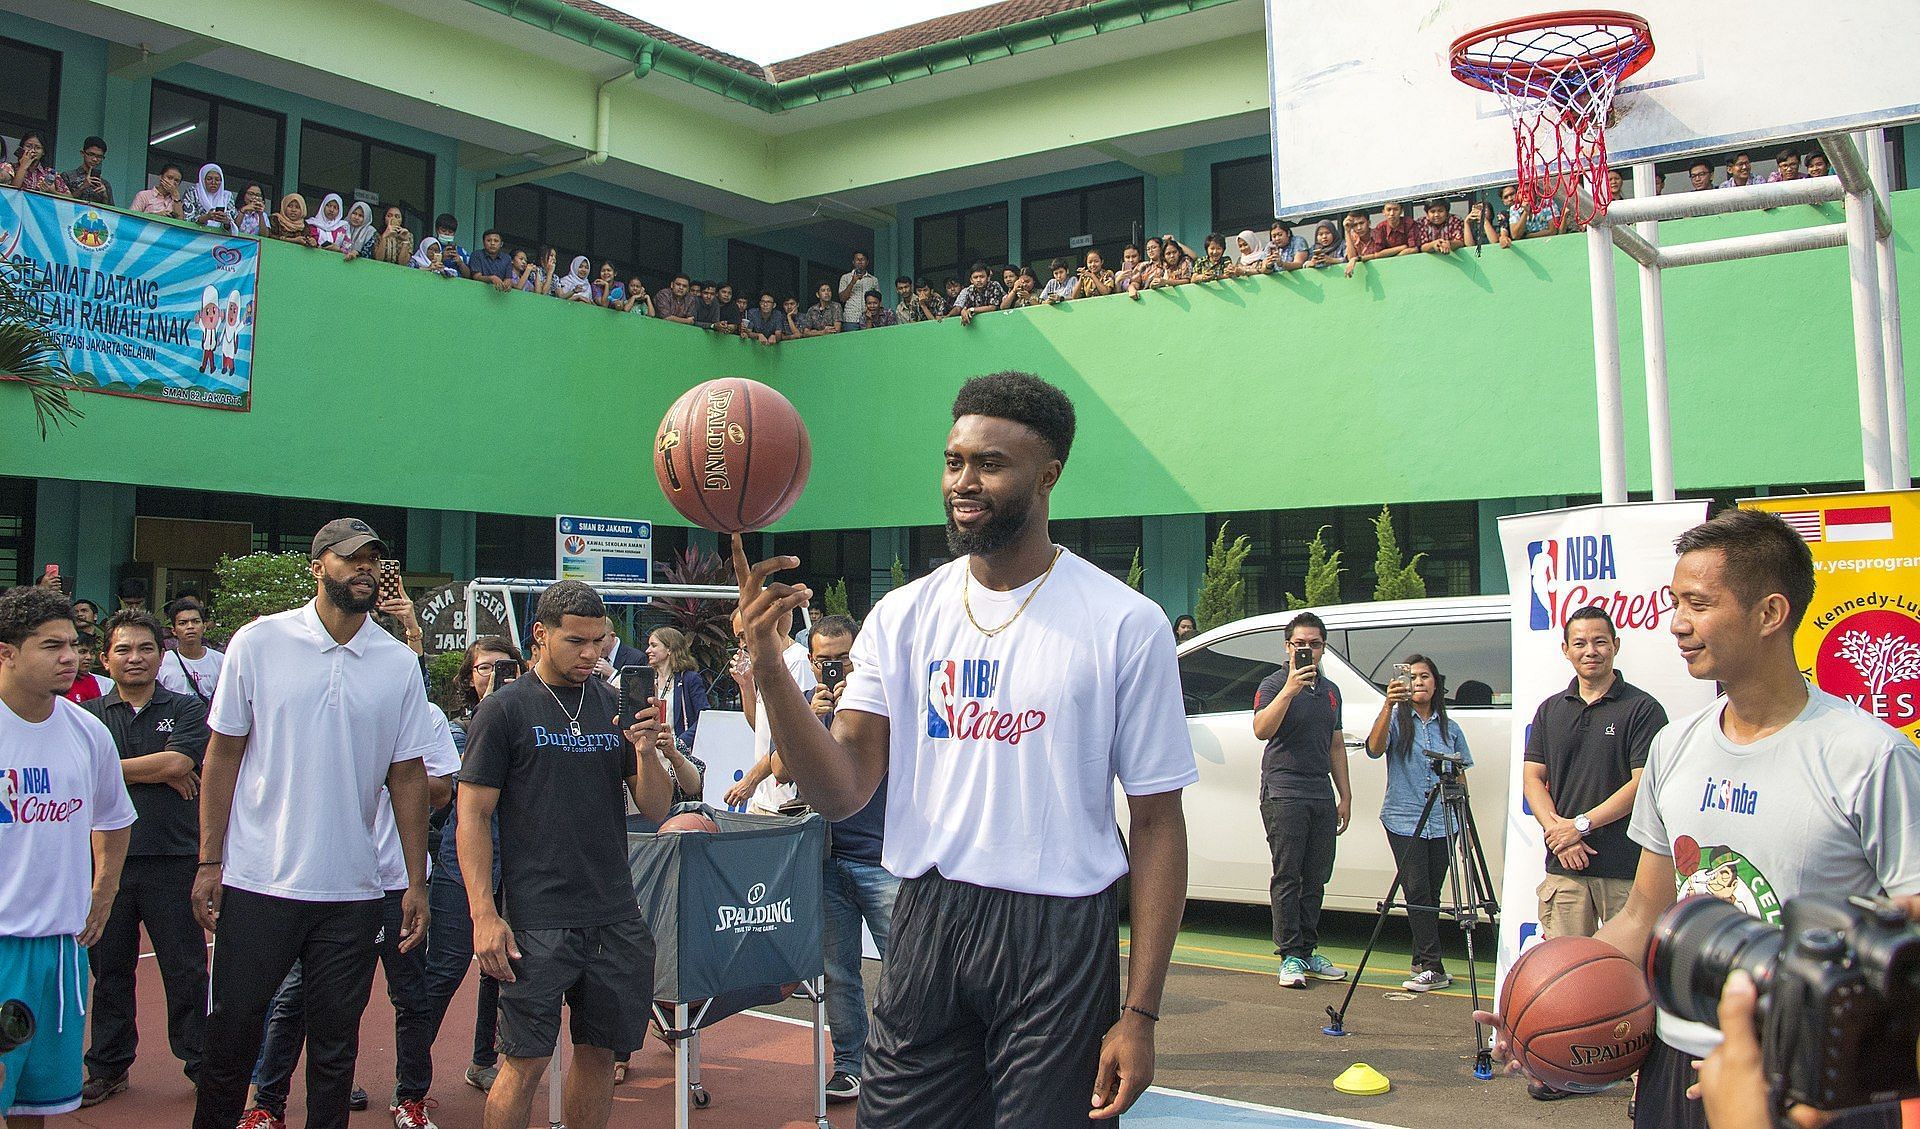 Two-time NBA All-Star Jaylen Brown of the Boston Celtics will play for the London Youth charity in this weekend